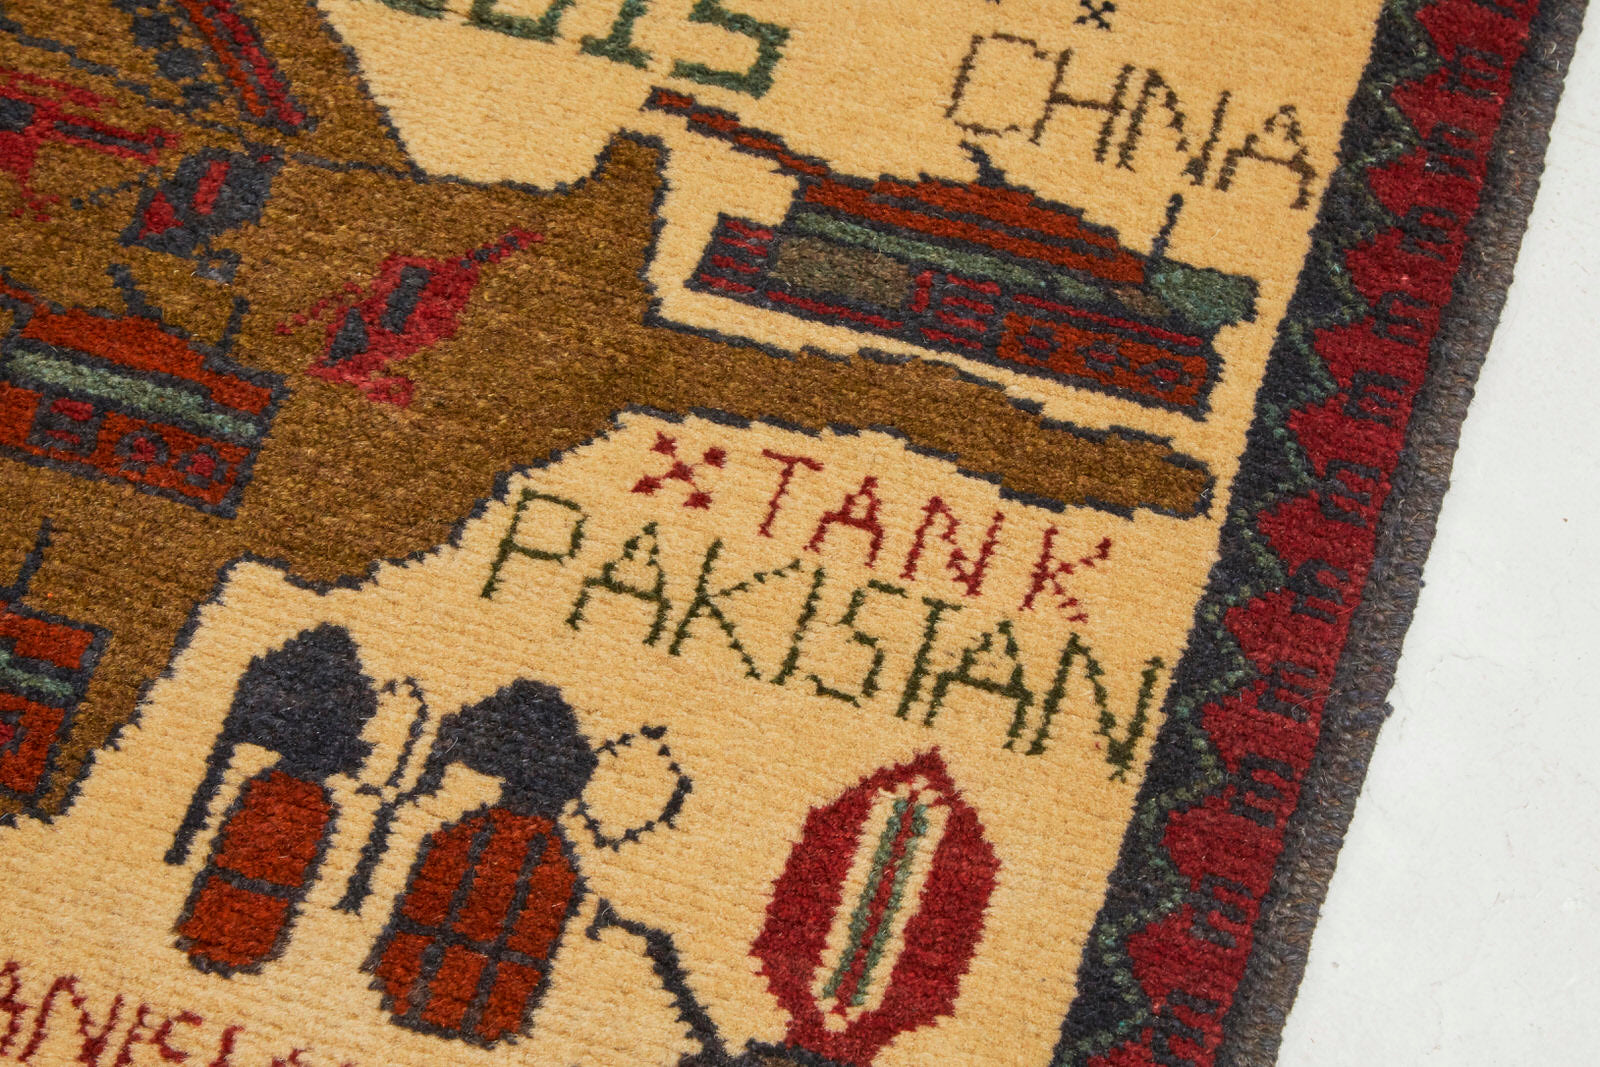 Hand woven Afghan war rug with map images, tanks, weapons and the words "Pakistan," "2015," "Made in Afghanistan" with cream background and red, brown and blue images - Available from King Kennedy Rugs Los Angeles